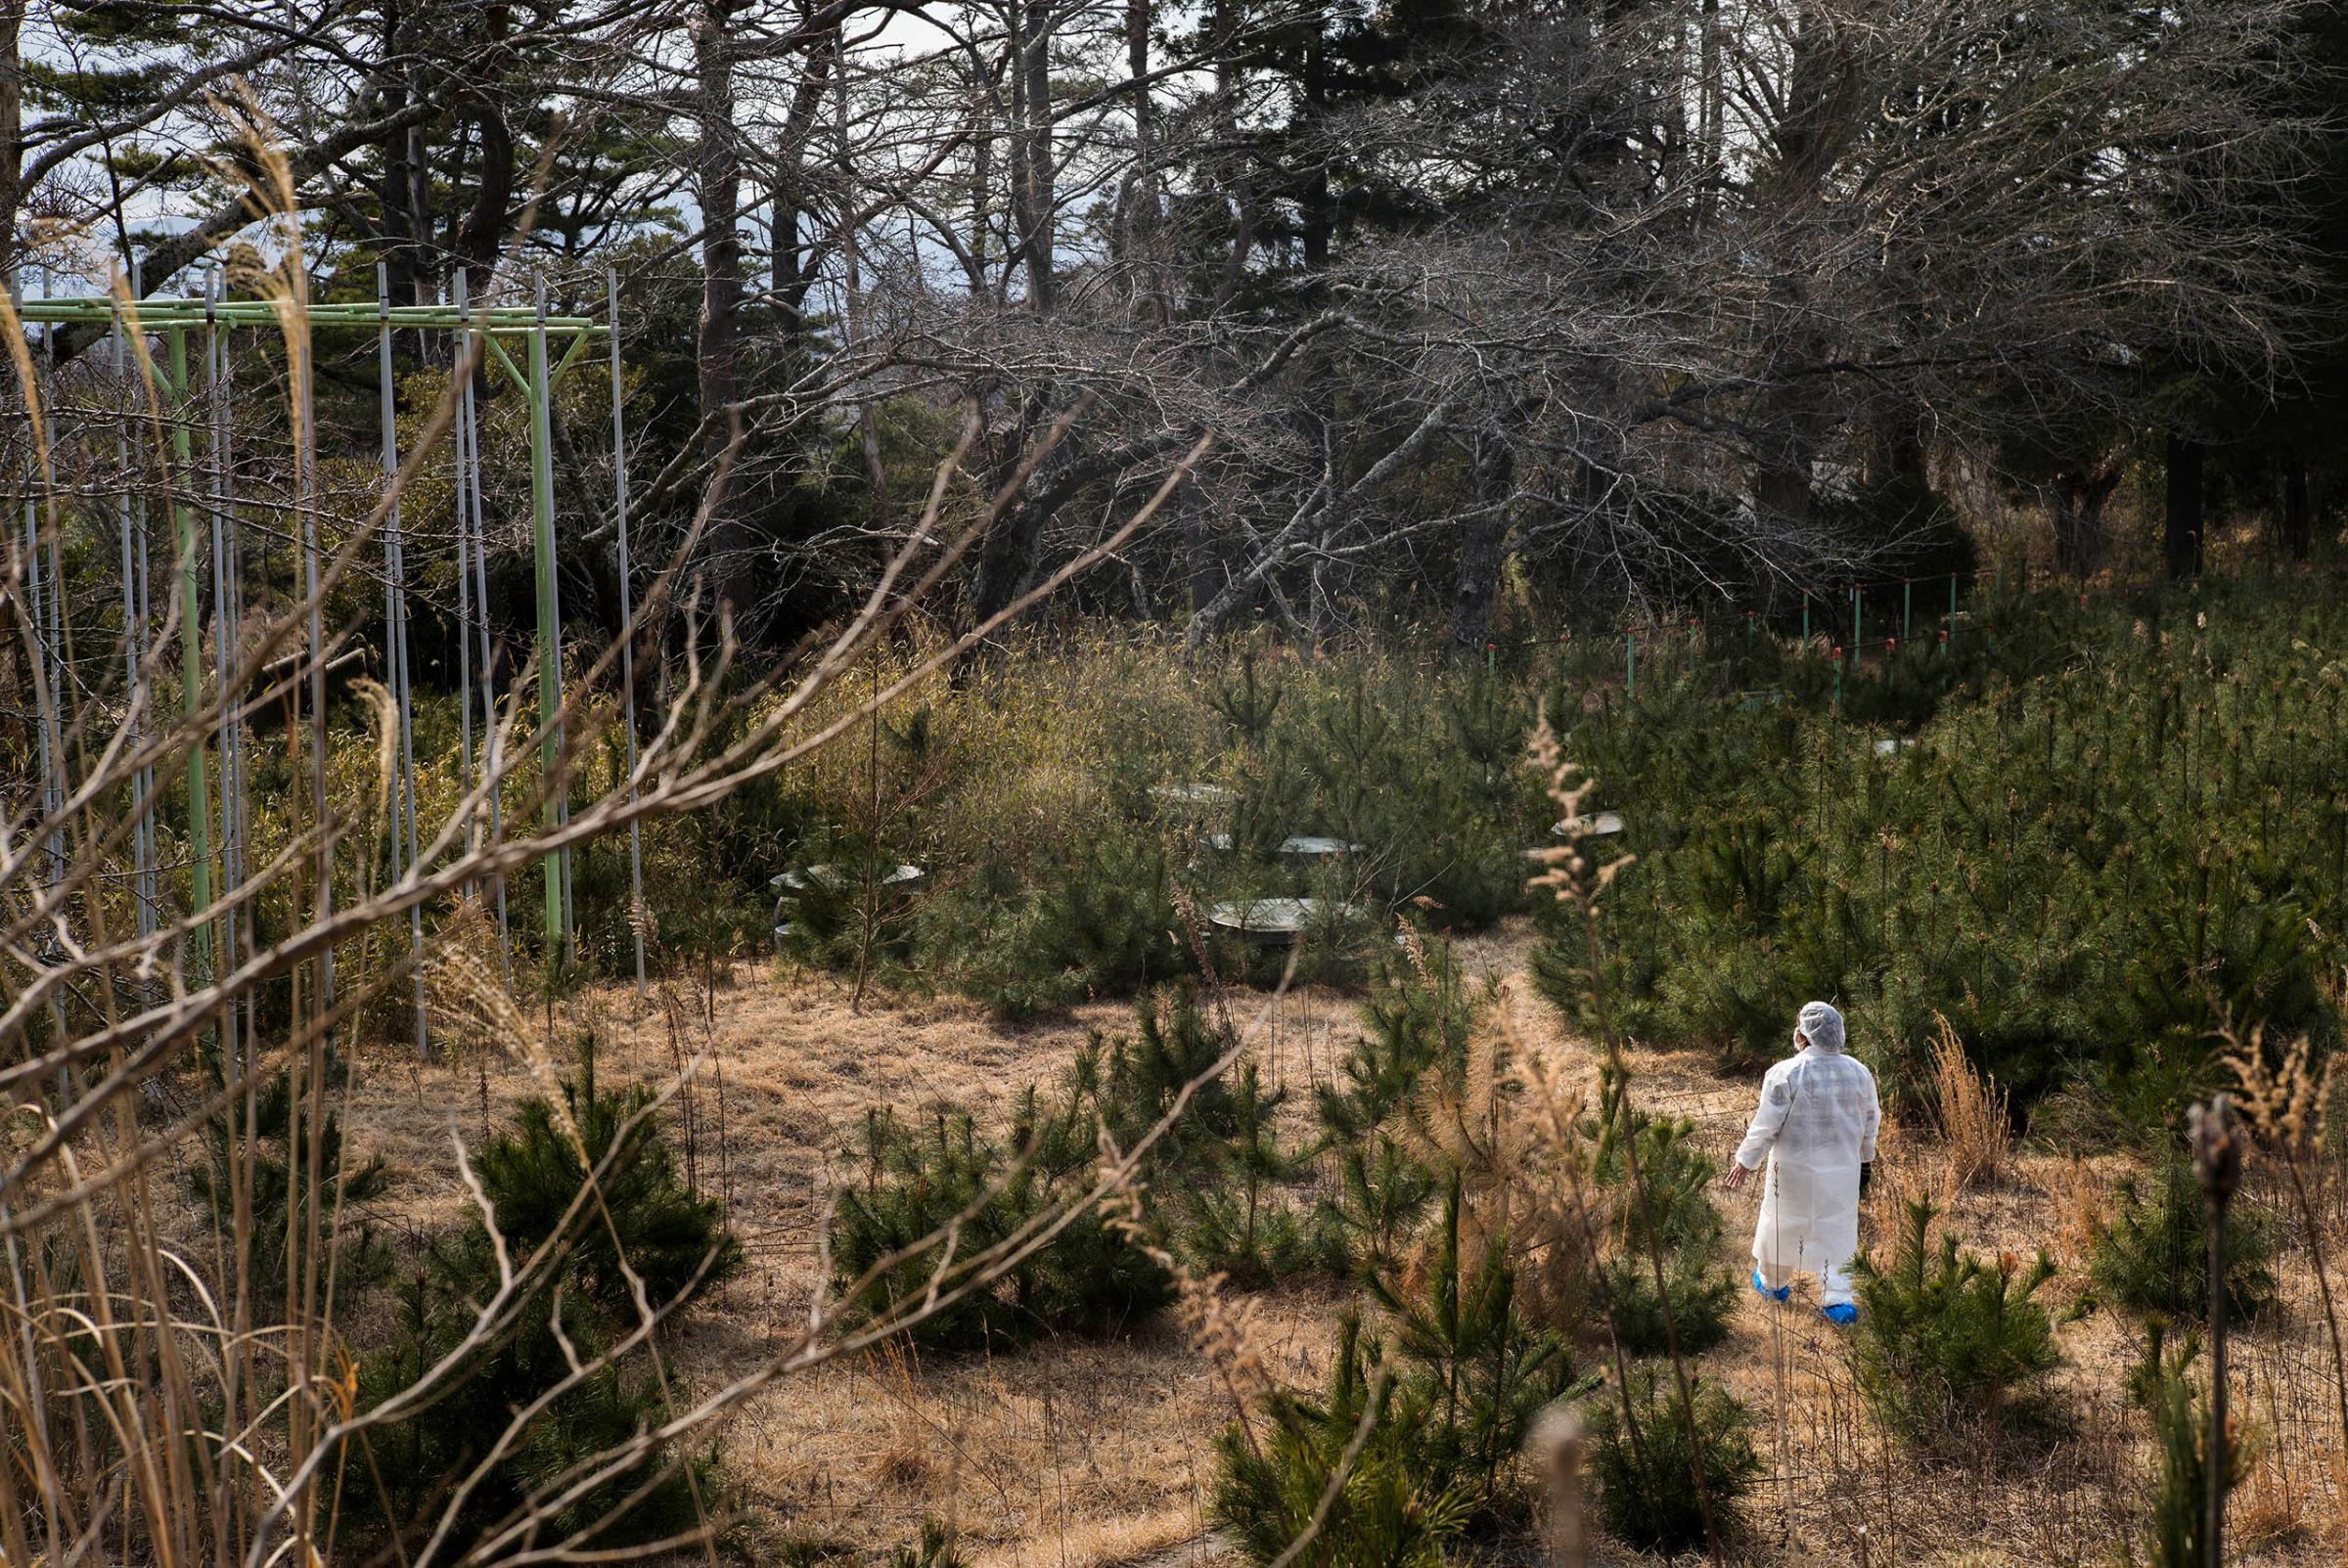 Terumi Murakami, a 43-year-old mother of three children and an evacuee from Okuma, about 5km from Fukushima Daiichi nuclear power plant, walks through her children's highly contaminated and abandoned Kumano Elementary School grounds in Okuma, Japan, March 4, 2016. The school lies within the 5km exclusion zone around the crippled nuclear power plant.